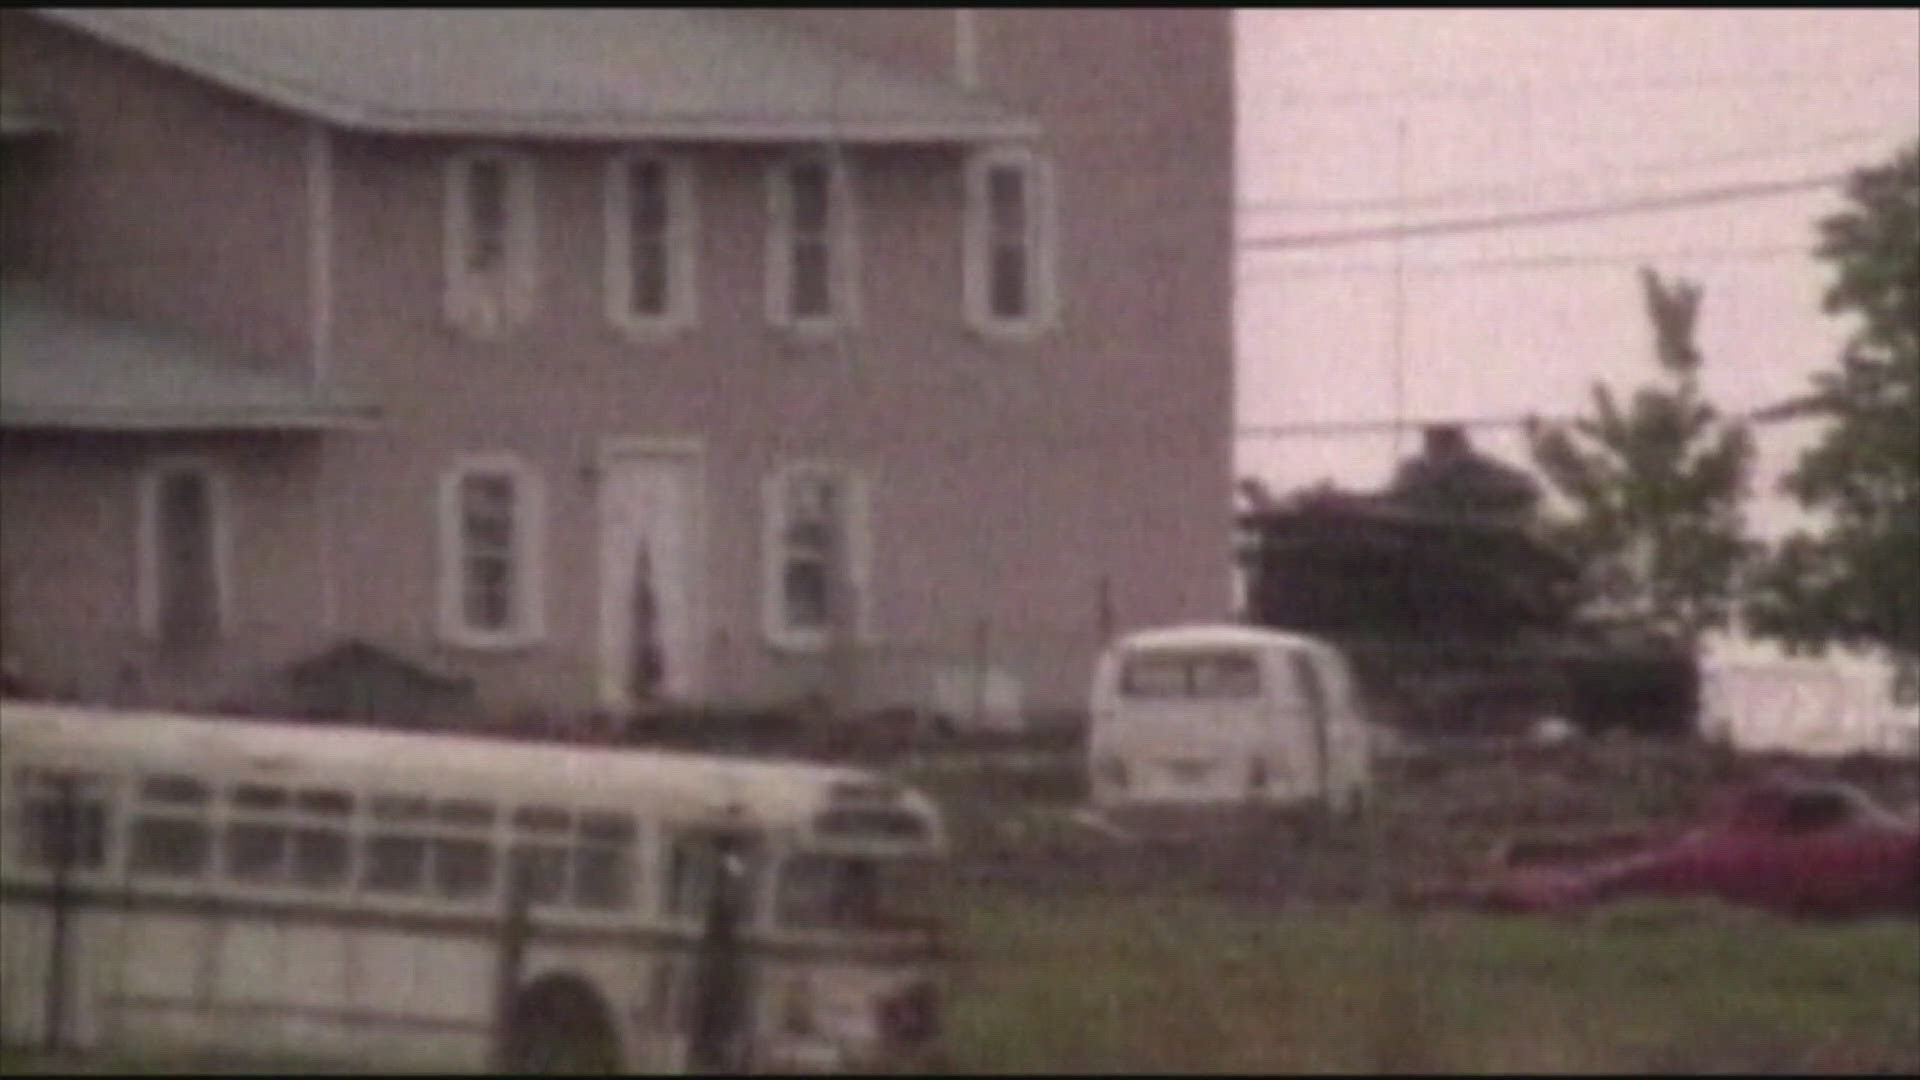 The Waco Siege came to a tragic end 31 years ago after 51 days of negotiations.